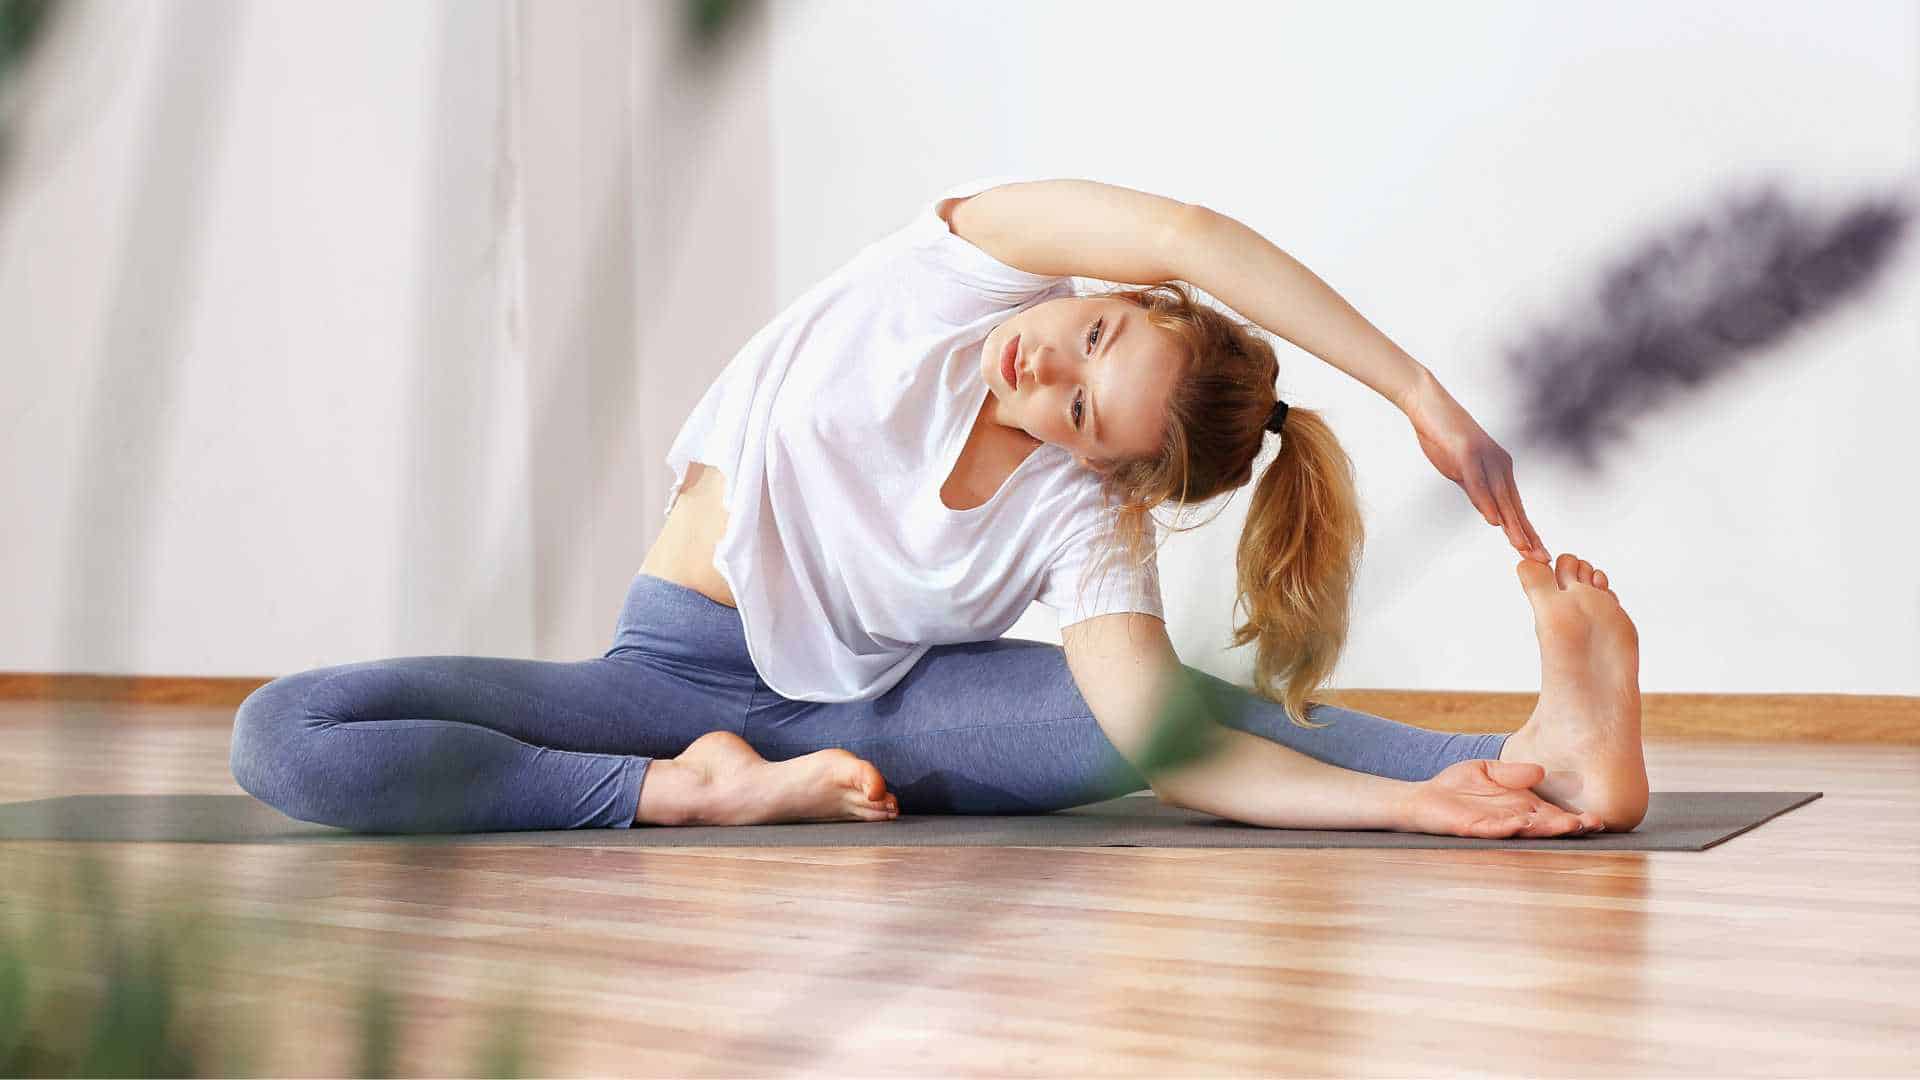 What is the Difference Between Hatha Yoga vs Vinyasa Yoga